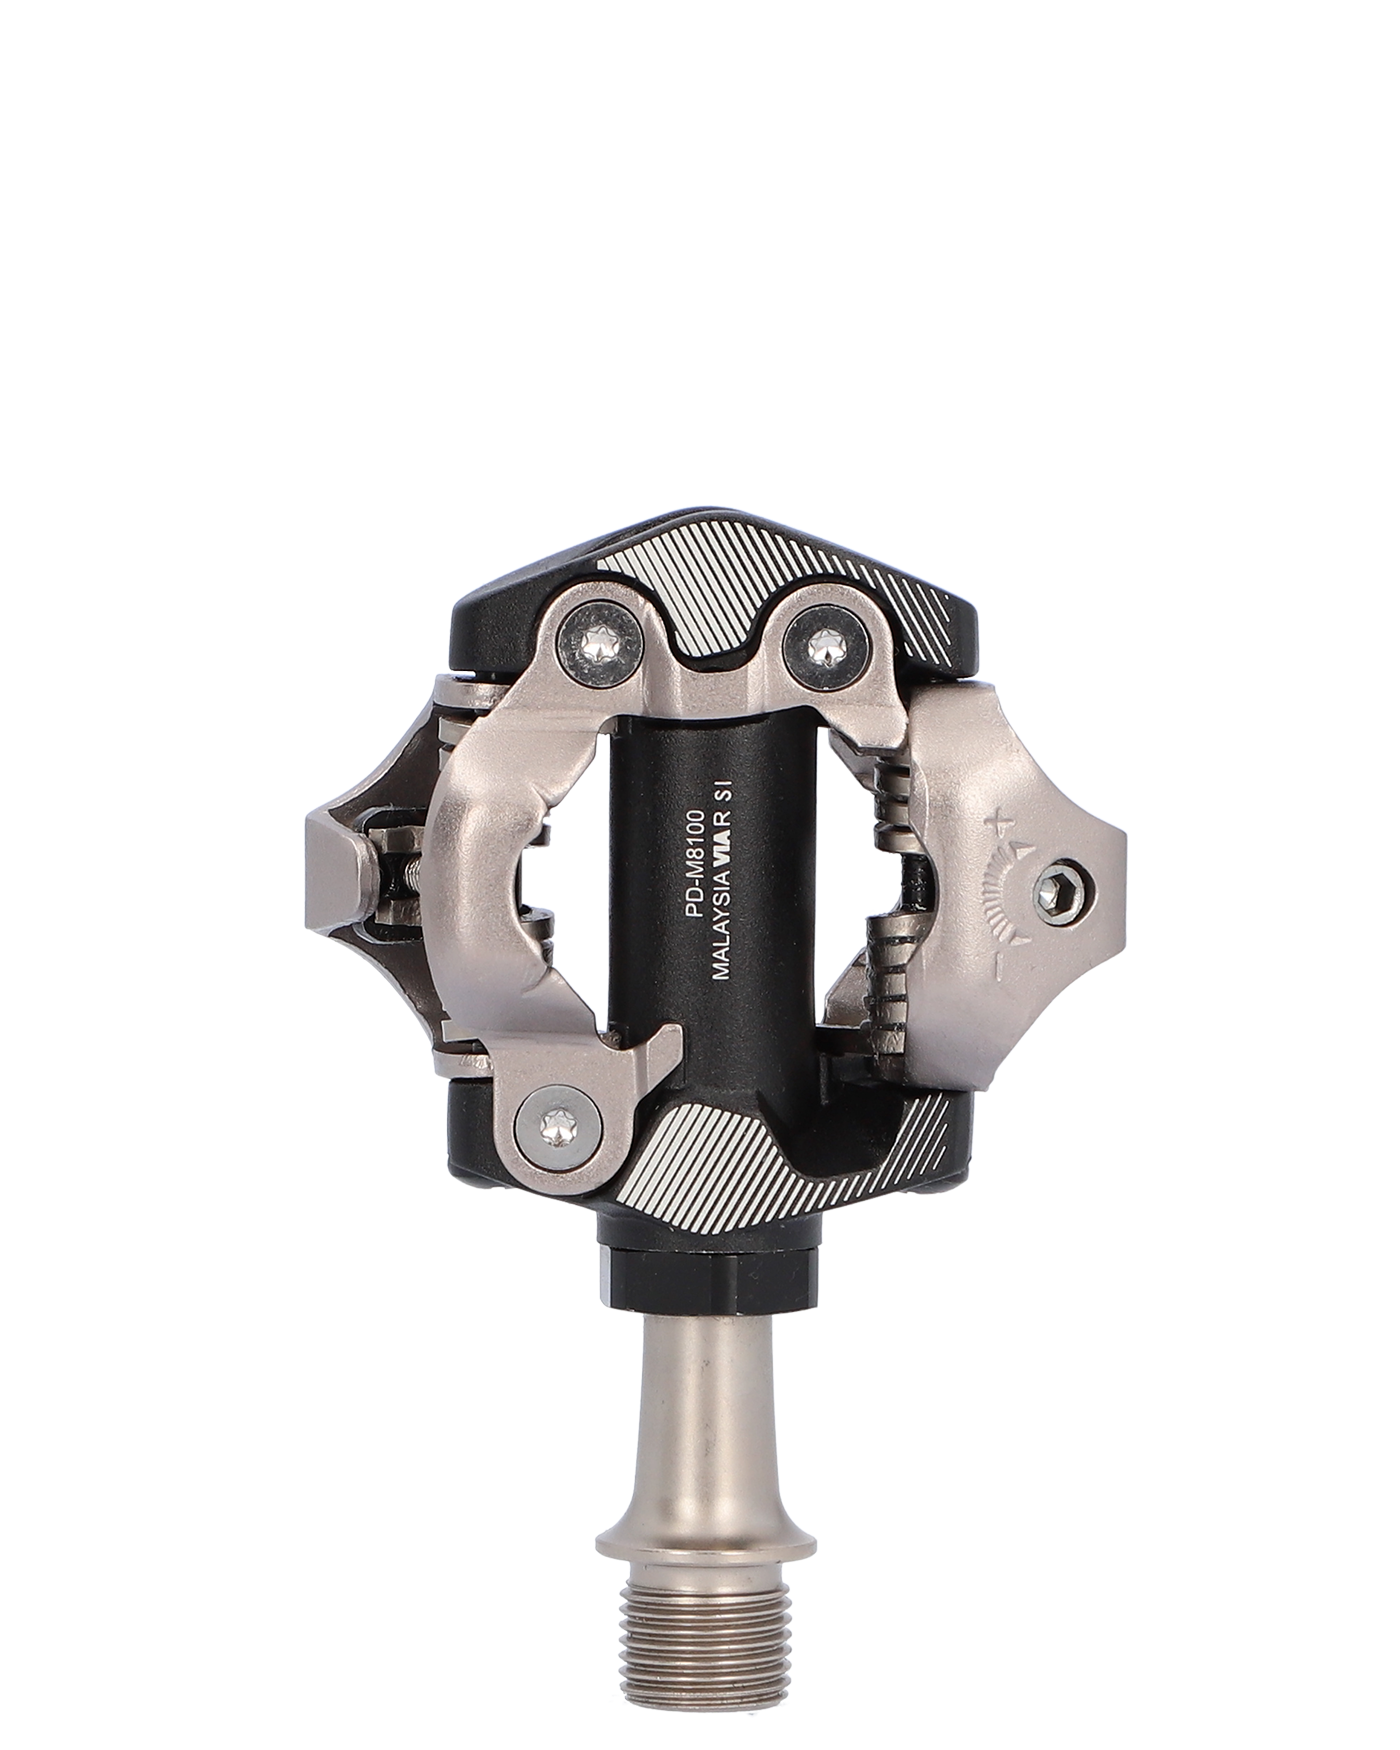 SHIMANO SPD Slef-locking Pedal PD-M8100 Dual Sided for Cross